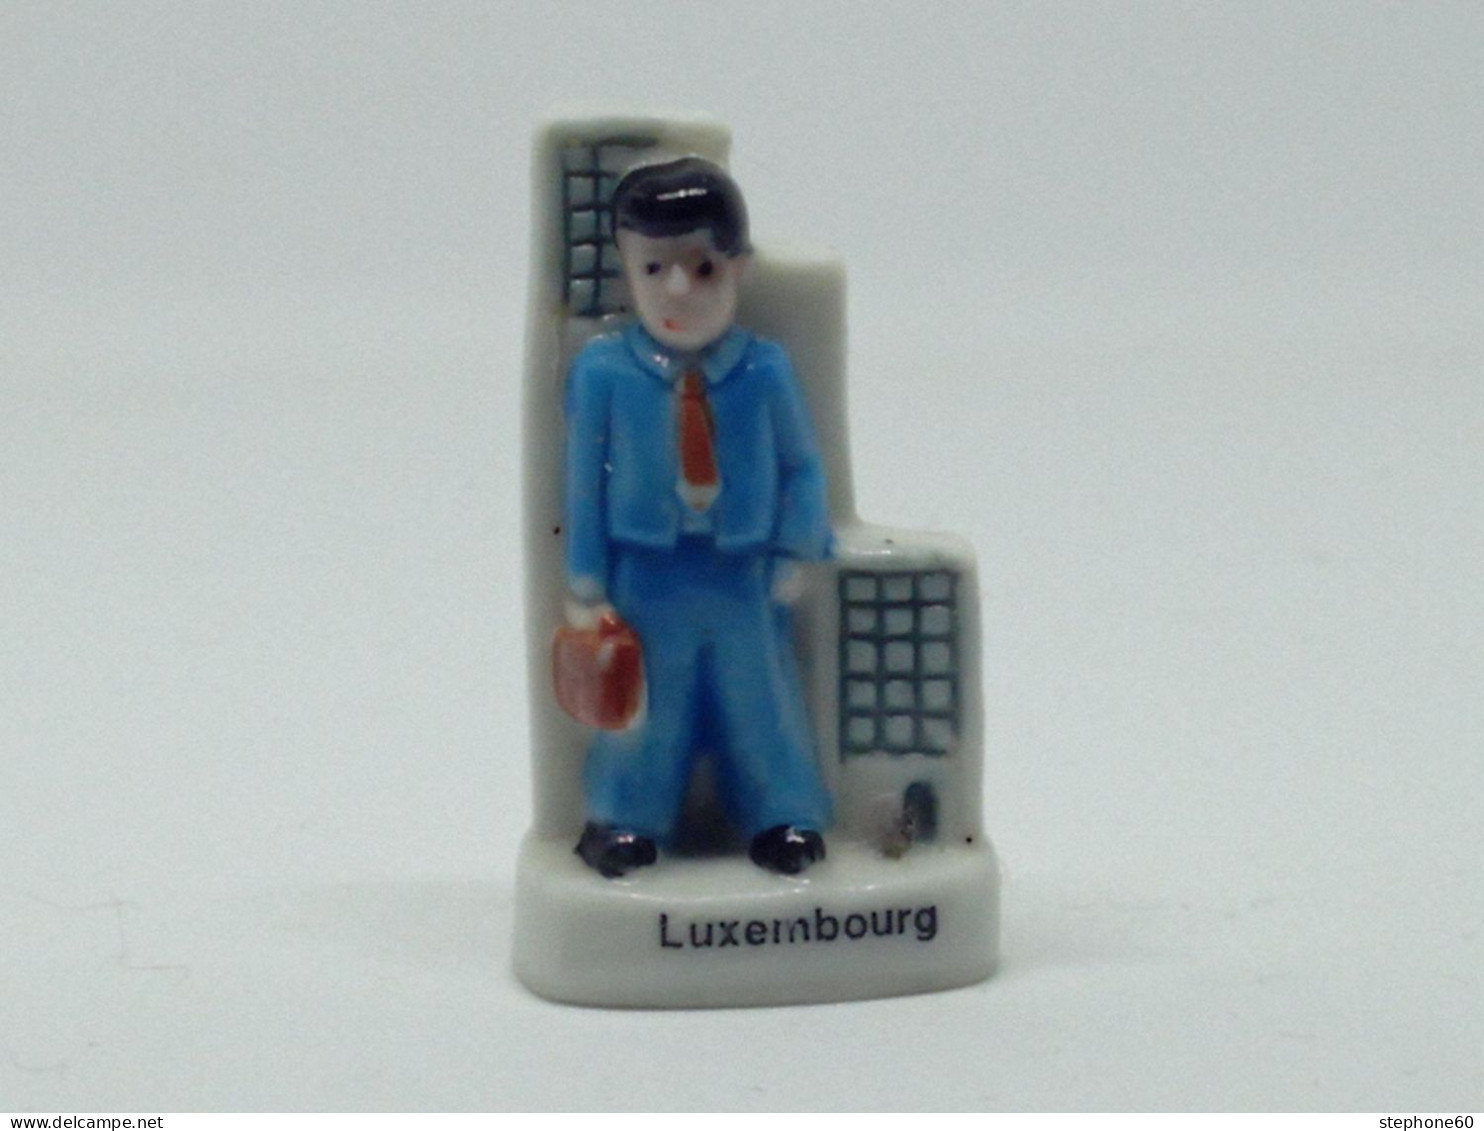 A002 - (21) Feve Pays Luxembourg Personnage - Länder